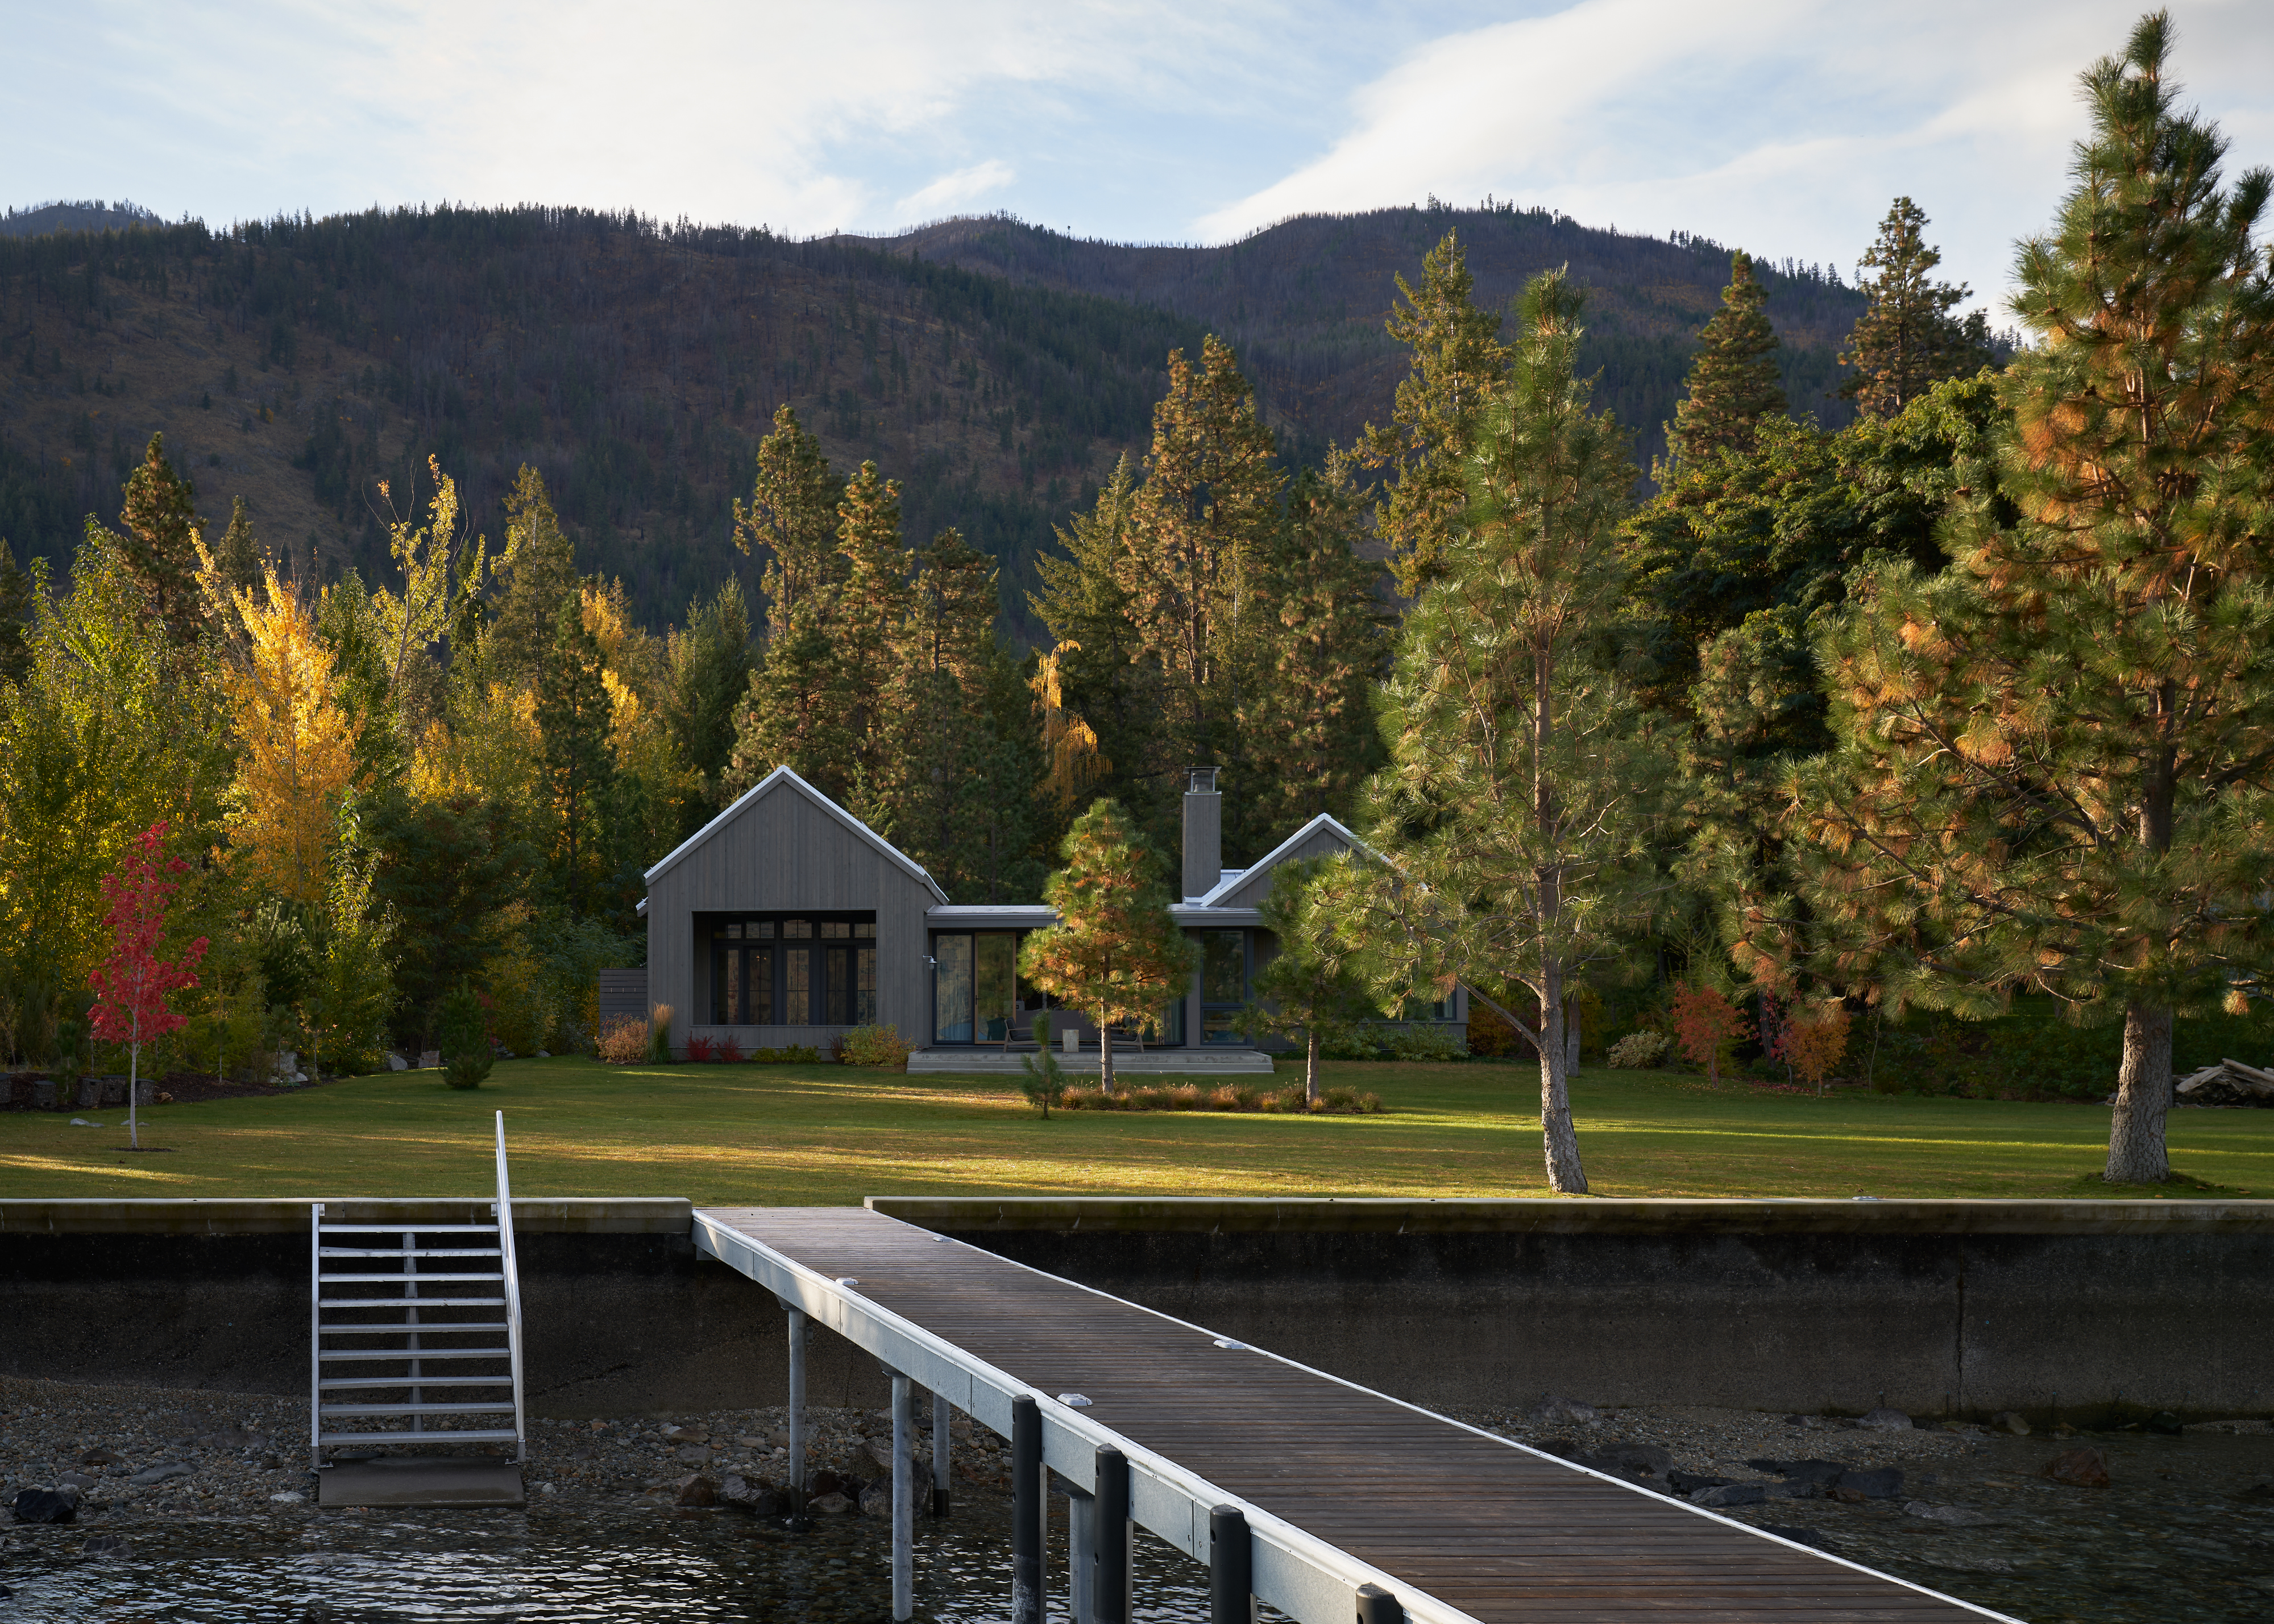 Backyard view of the house by the water with a visible dock. The architecture features clean, simple volumes.